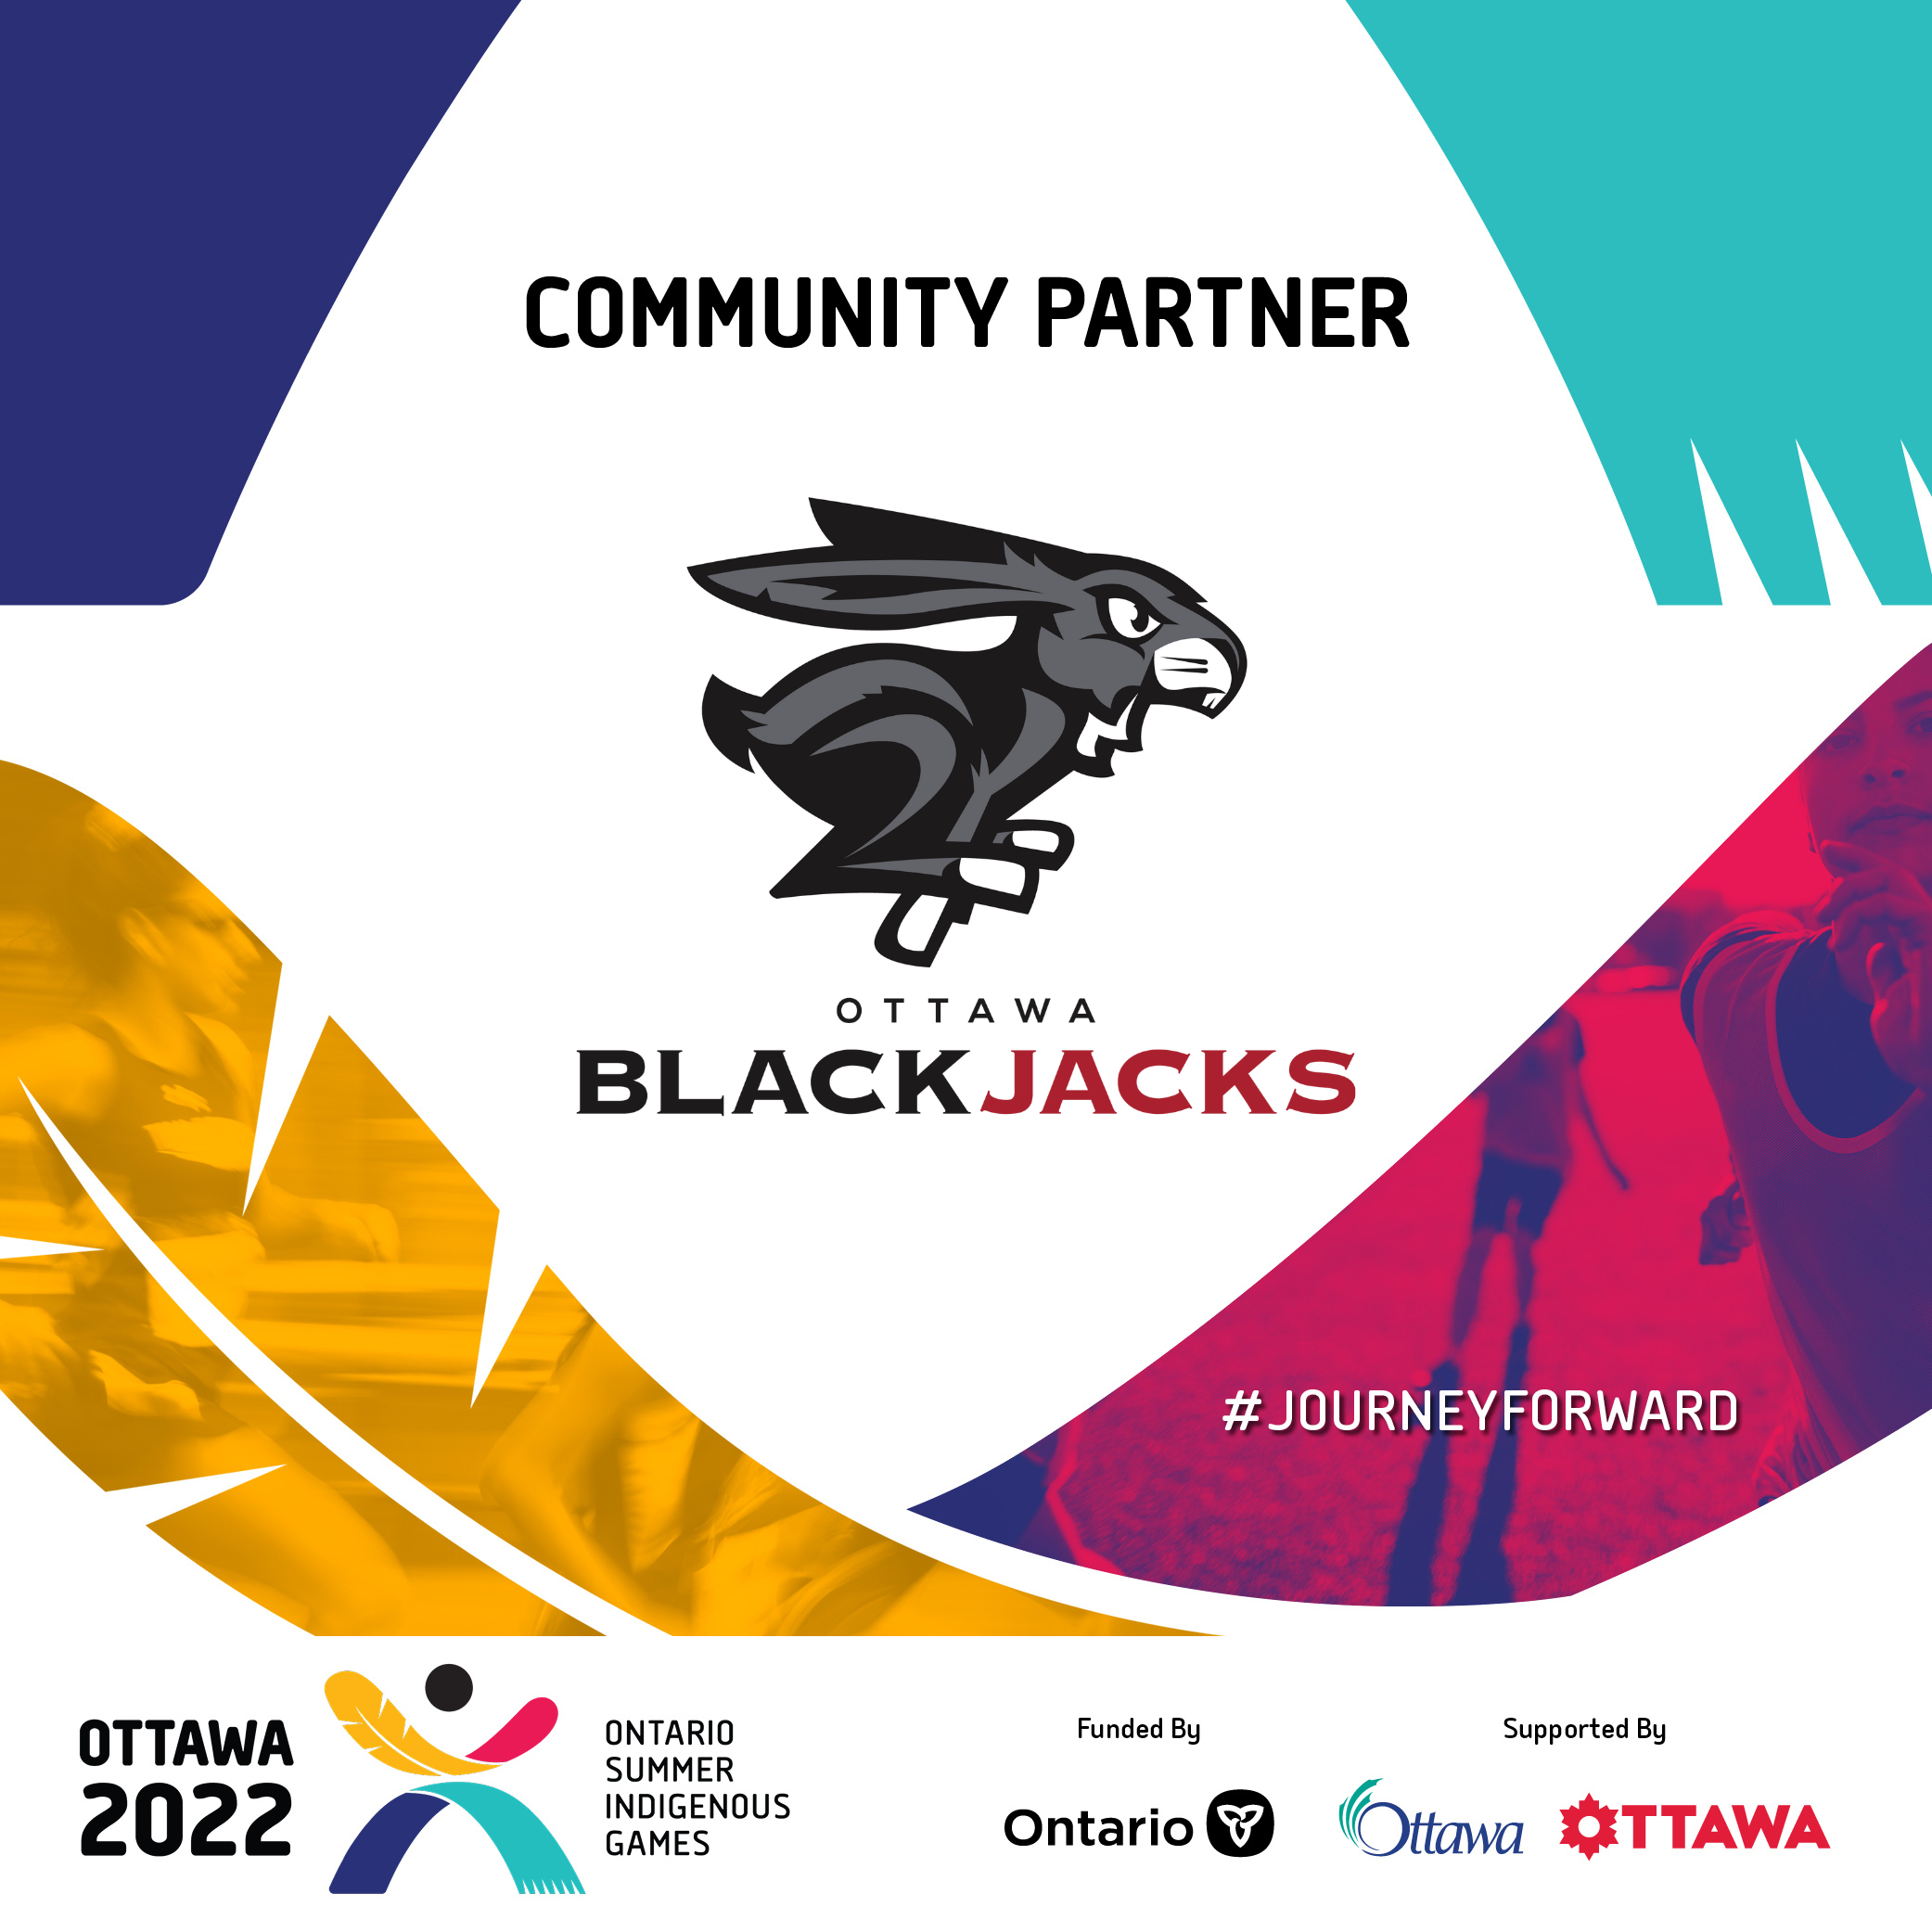 OTTAWA BLACKJACKS TEAM UP WITH THE 2022 ONTARIO SUMMER INDIGENOUS GAMES, FOR AN ALLEY-OOP FOR INDIGENOUS YOUTH